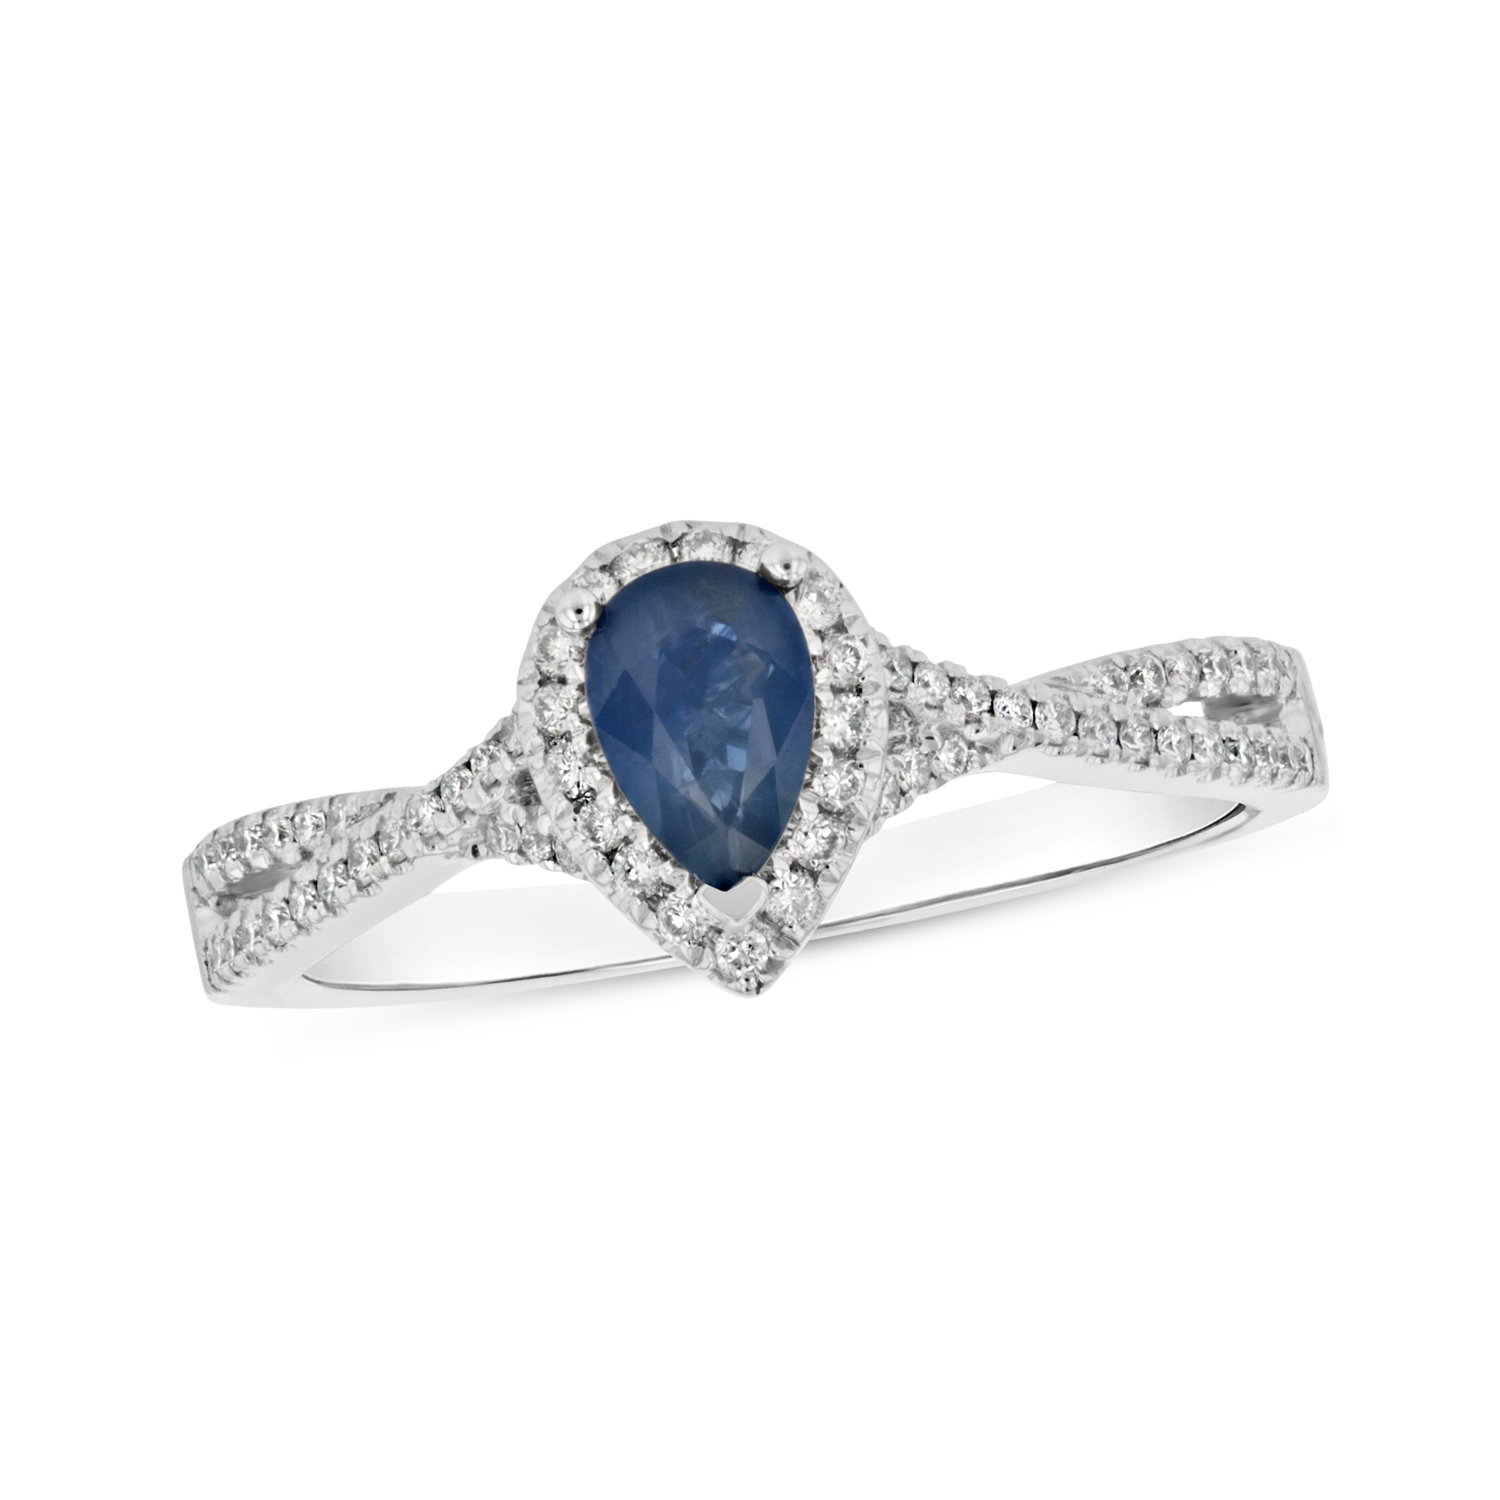 View 0.77ctw Diamnd and Pear Shaped Sapphire Ring in 18k White Gold